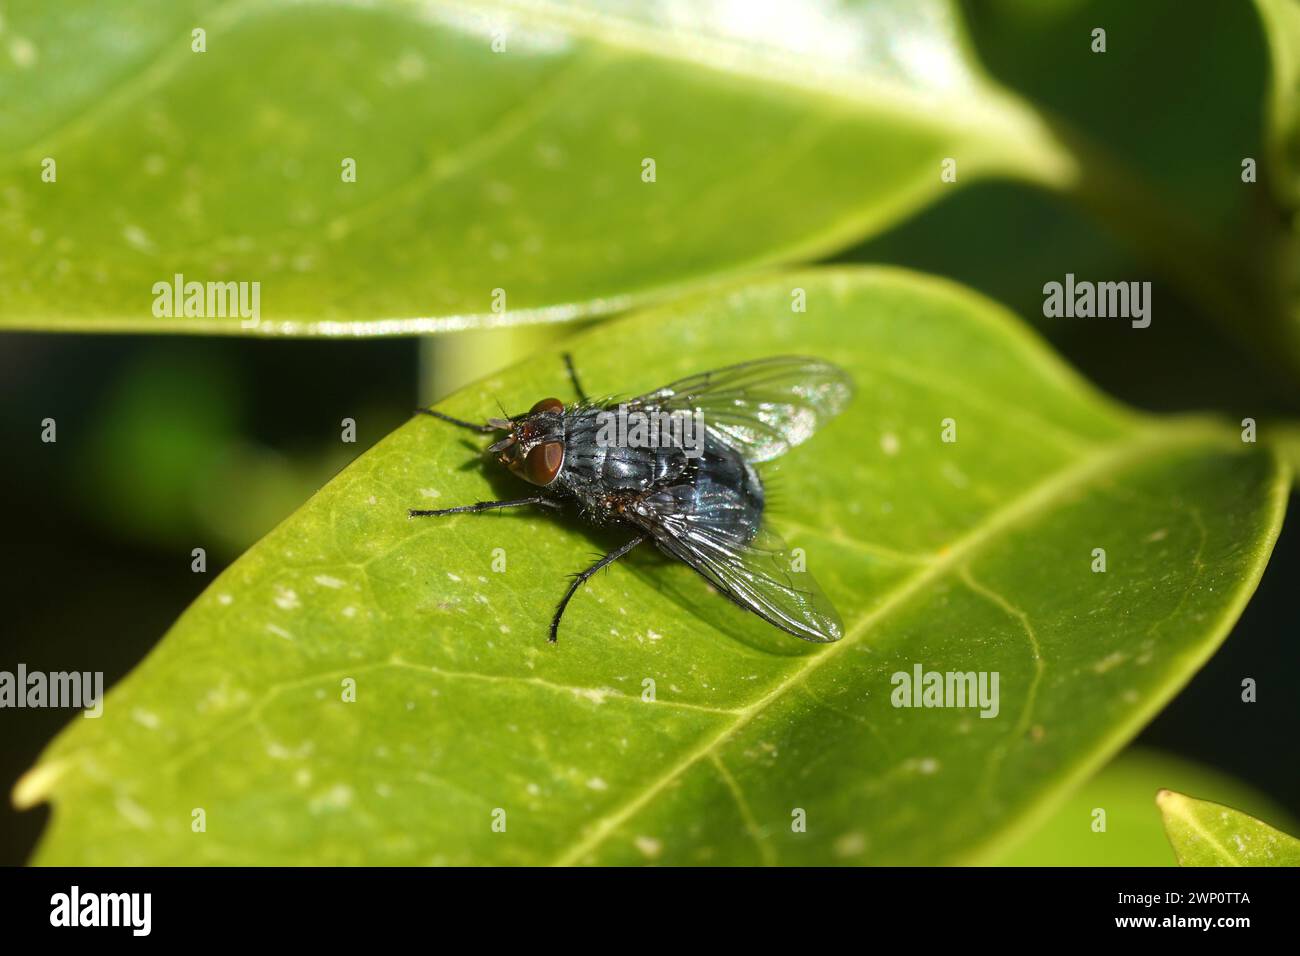 Close up blue blow fly, blue bottle fly Calliphora vicina, family blow flies (Calliphoridae) on a leaf of Japanese laurel (Aucuba japonica) Stock Photo